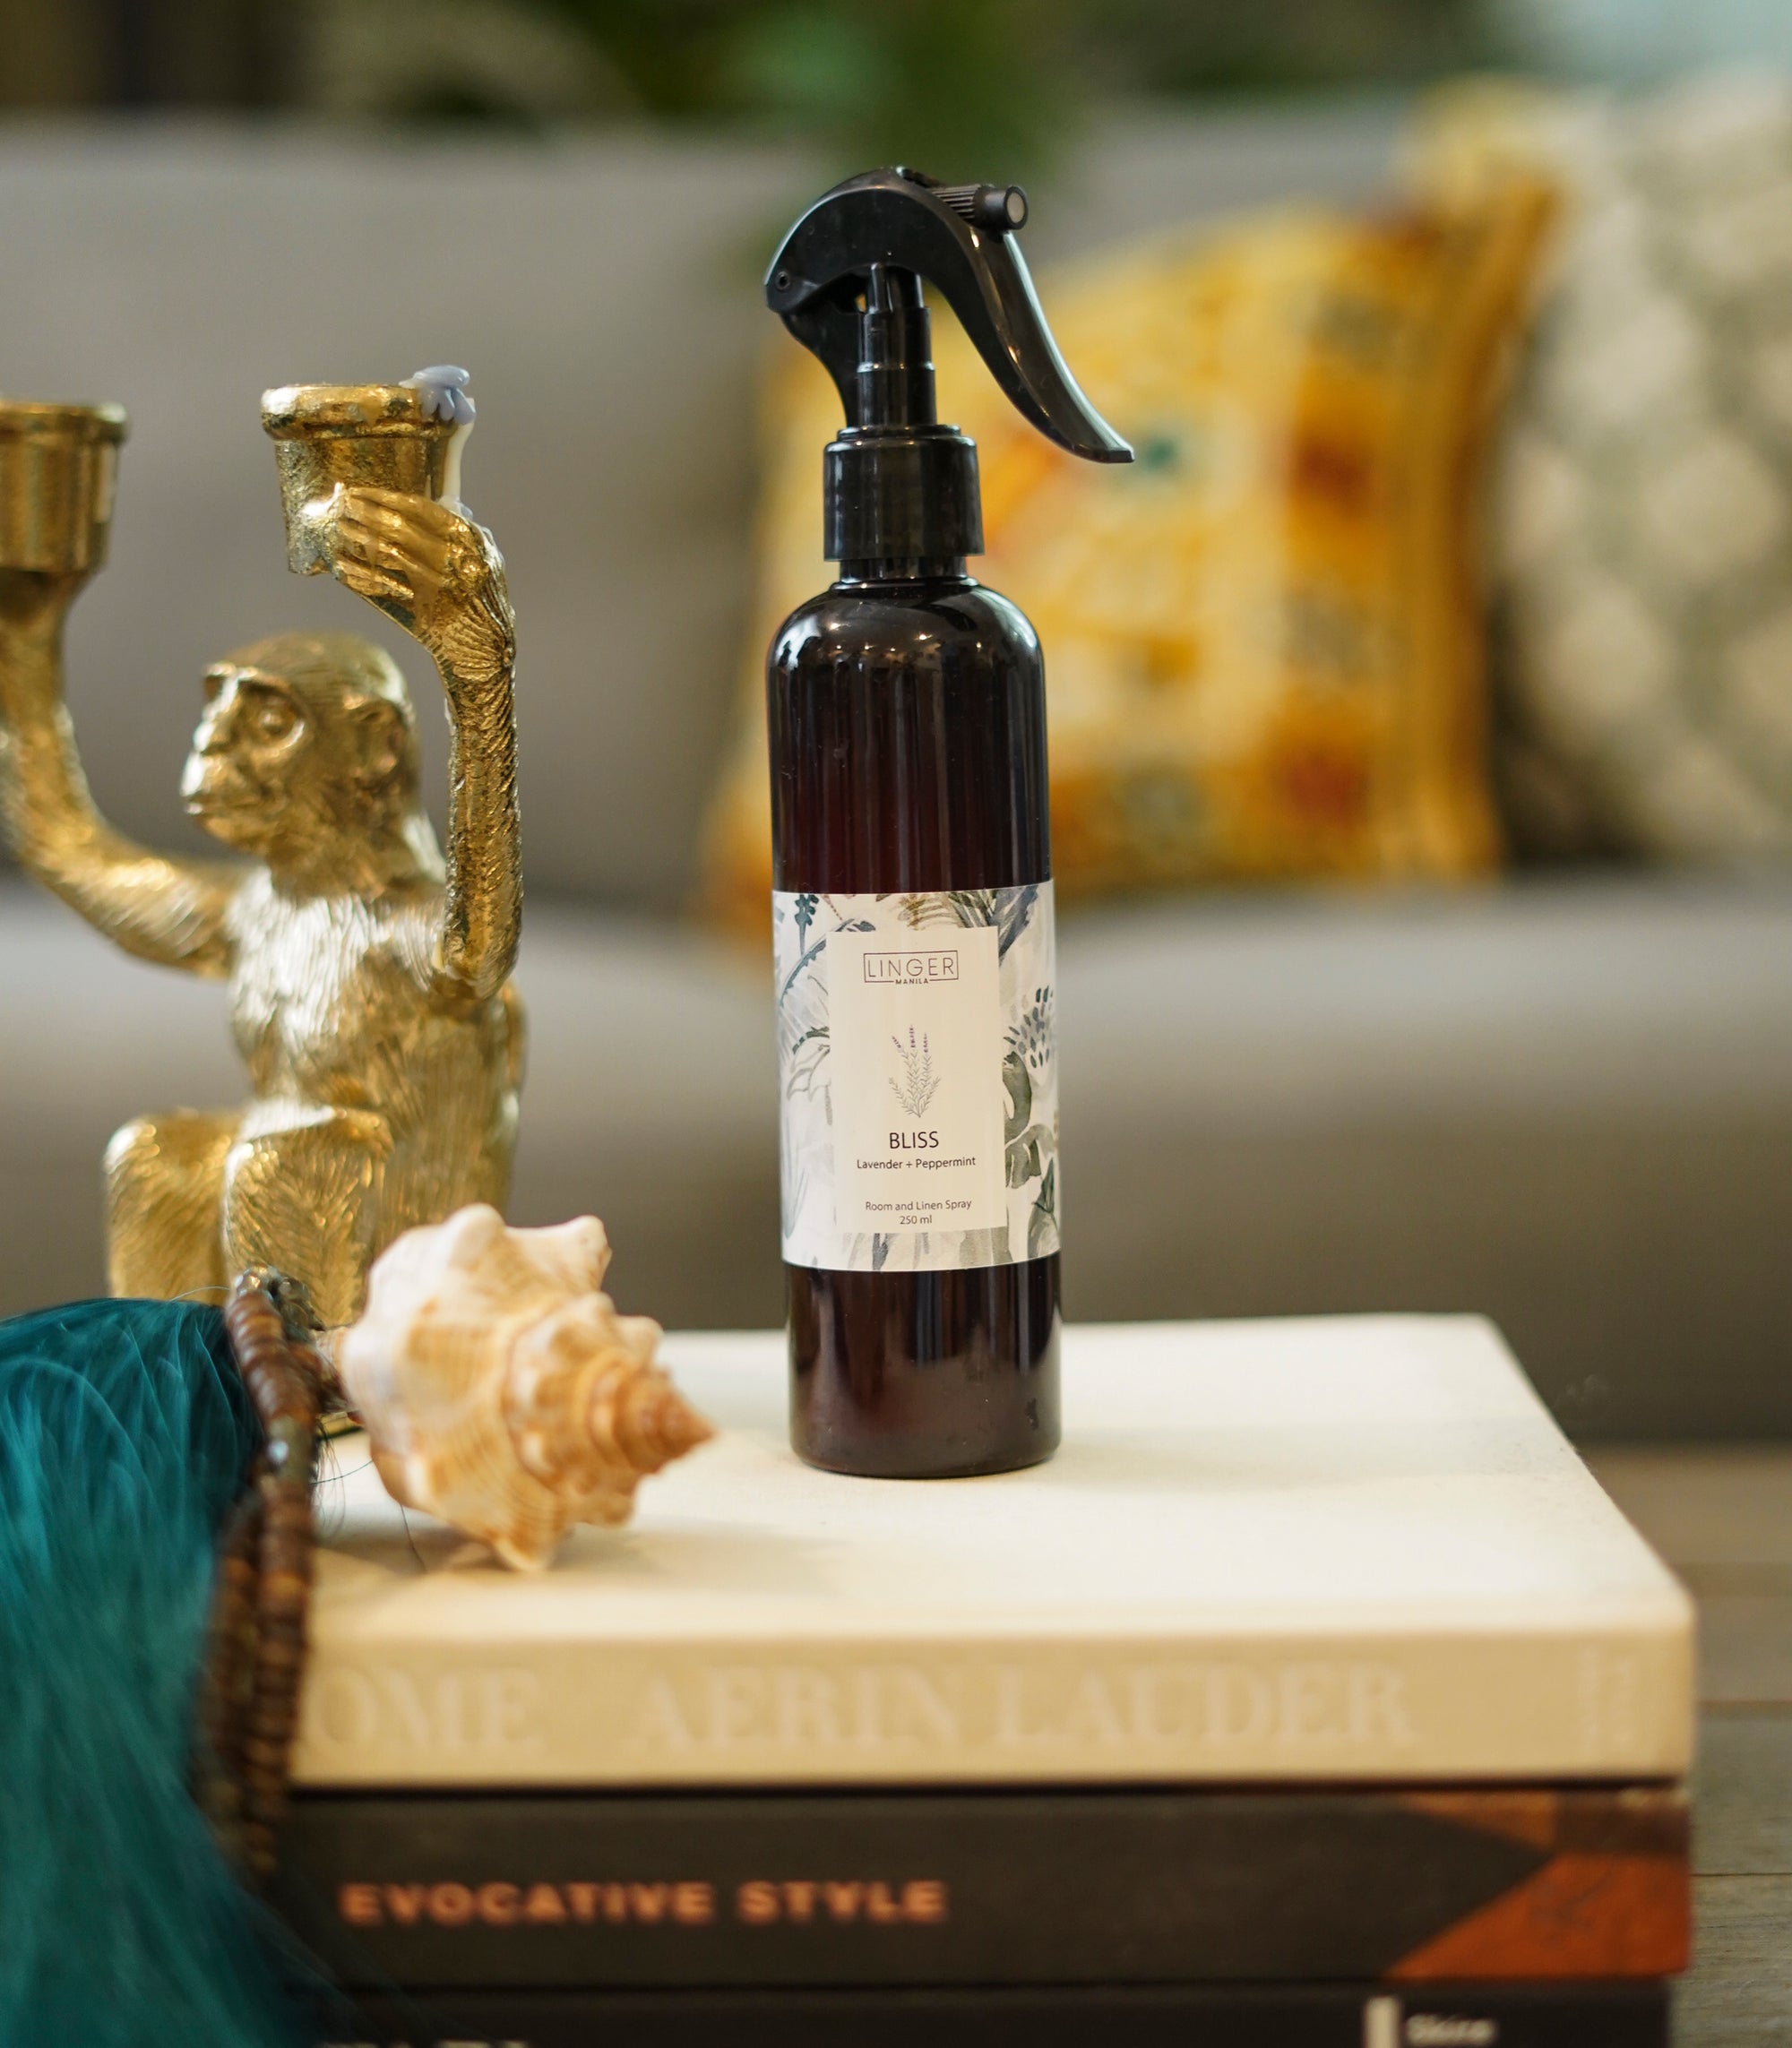 Linger Bliss Lavender and Peppermint Room and Linen Spray